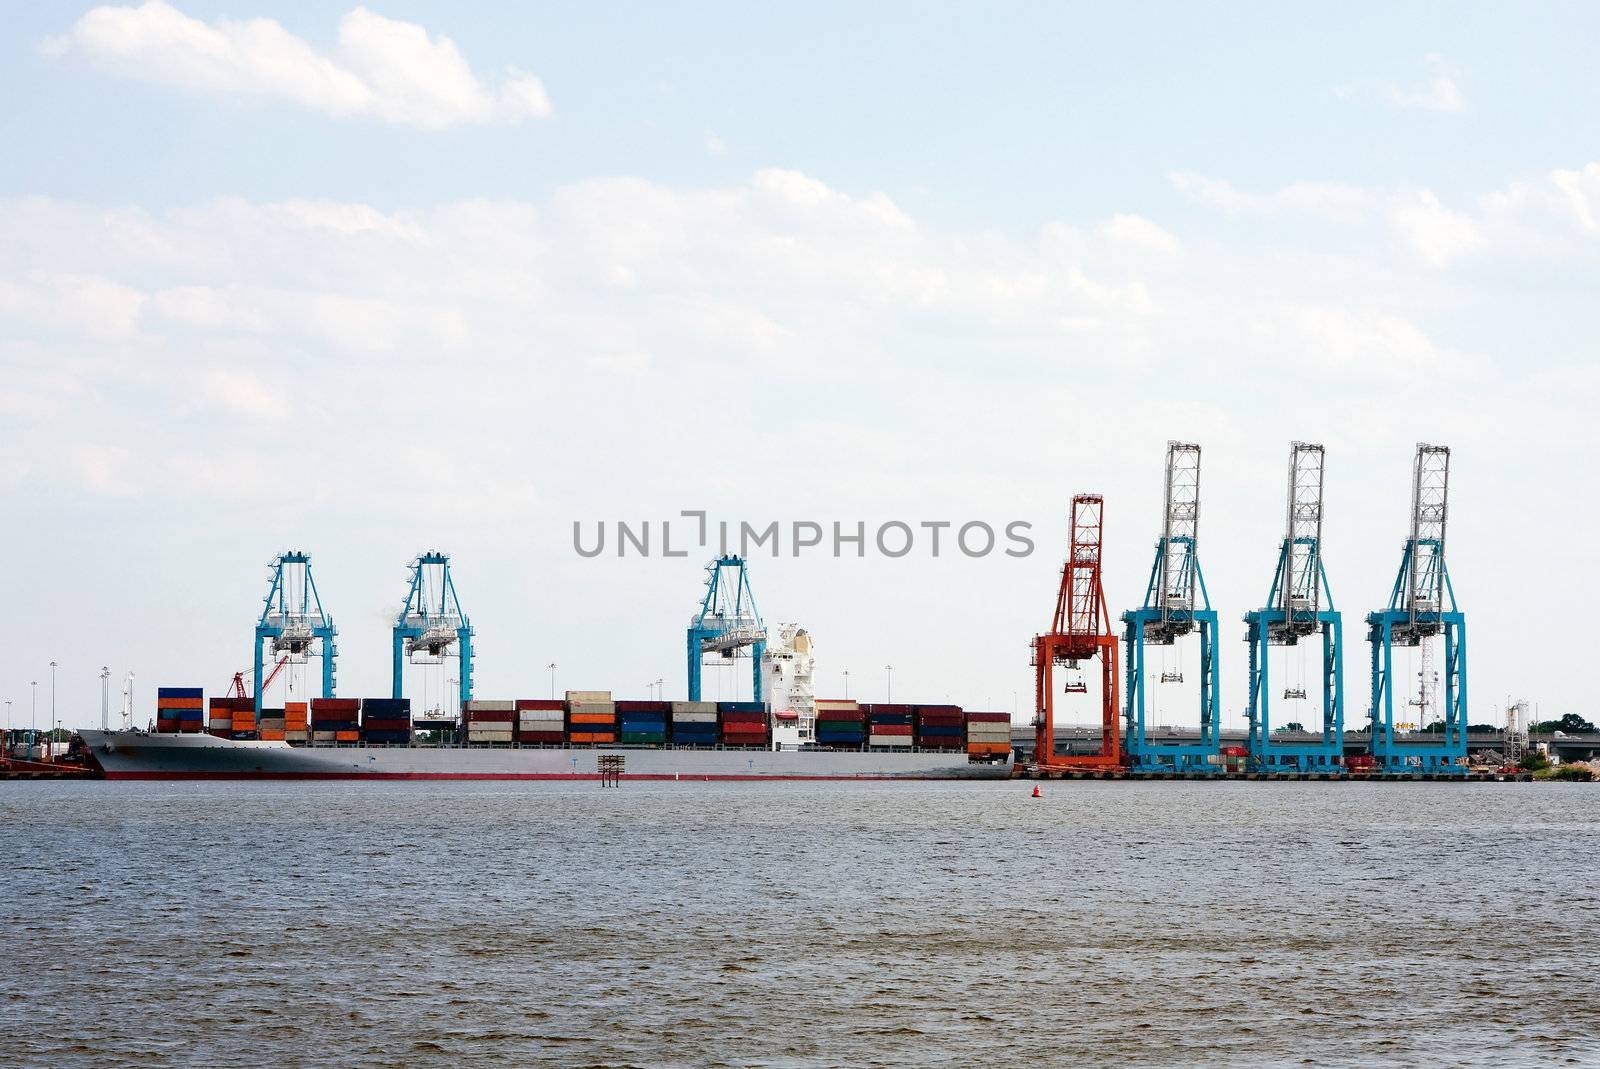 Commercial loading docks where cranes are loading containers filled with merchandise cargo on a transport ship